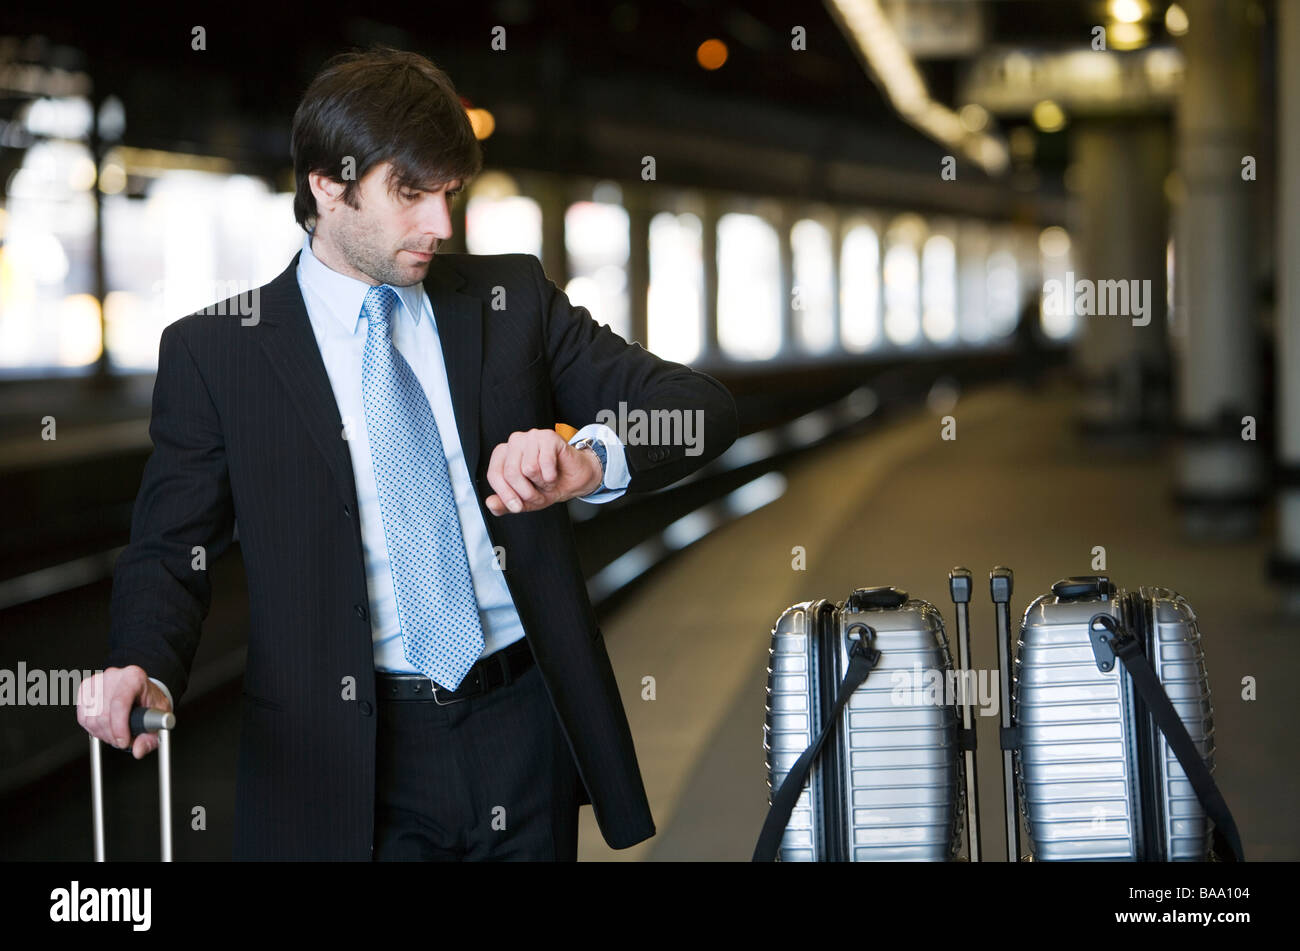 Businessman with suitcases standing at the trainstation waiting, Stockholm, Sweden. Stock Photo